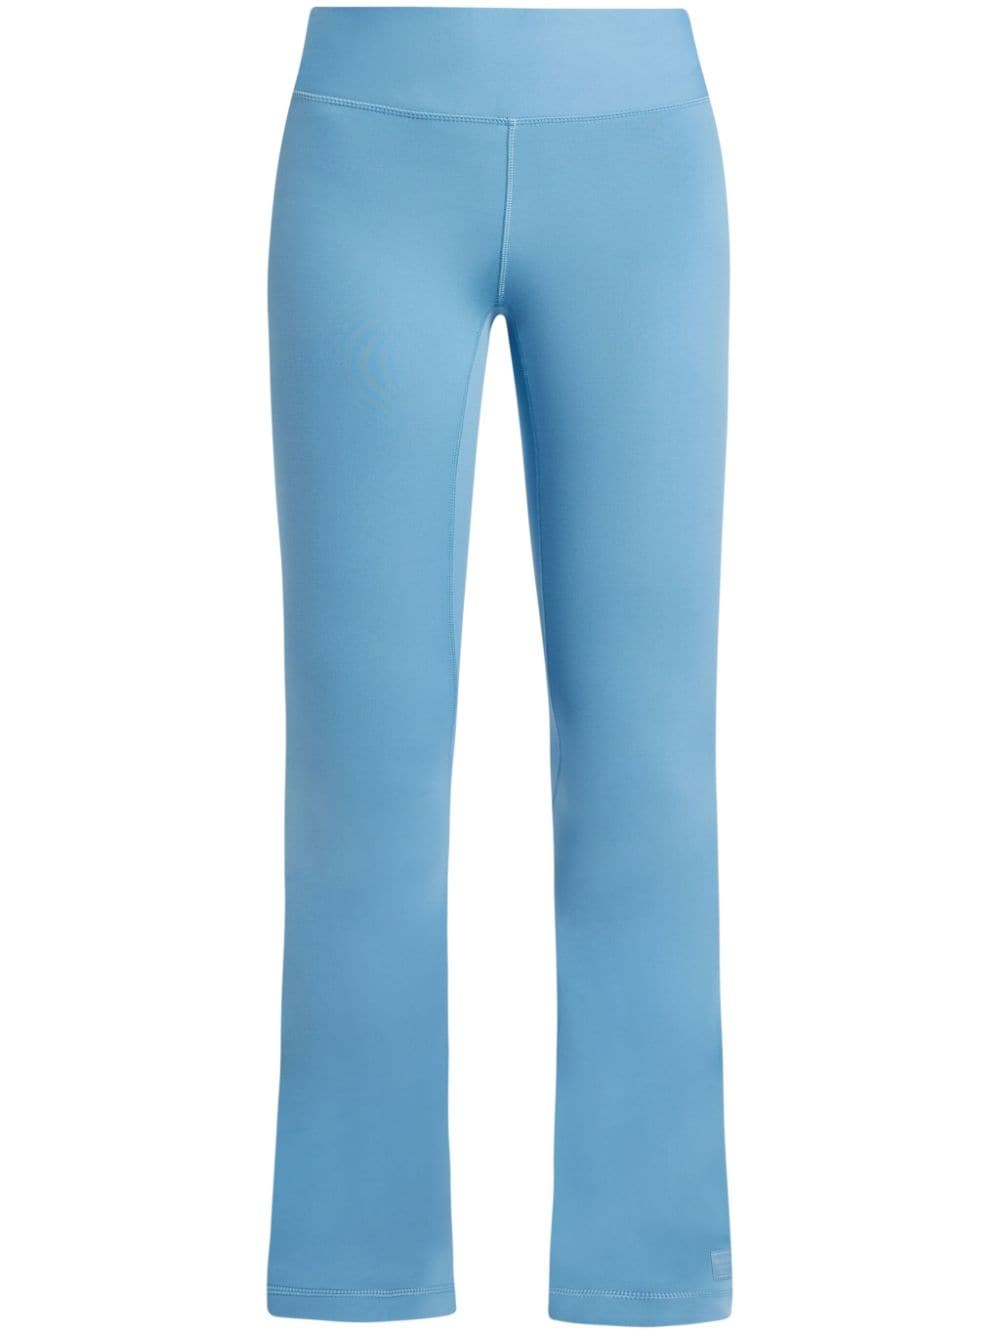 THE GIVING MOVEMENT mid-rise bootcut leggings - Blue von THE GIVING MOVEMENT